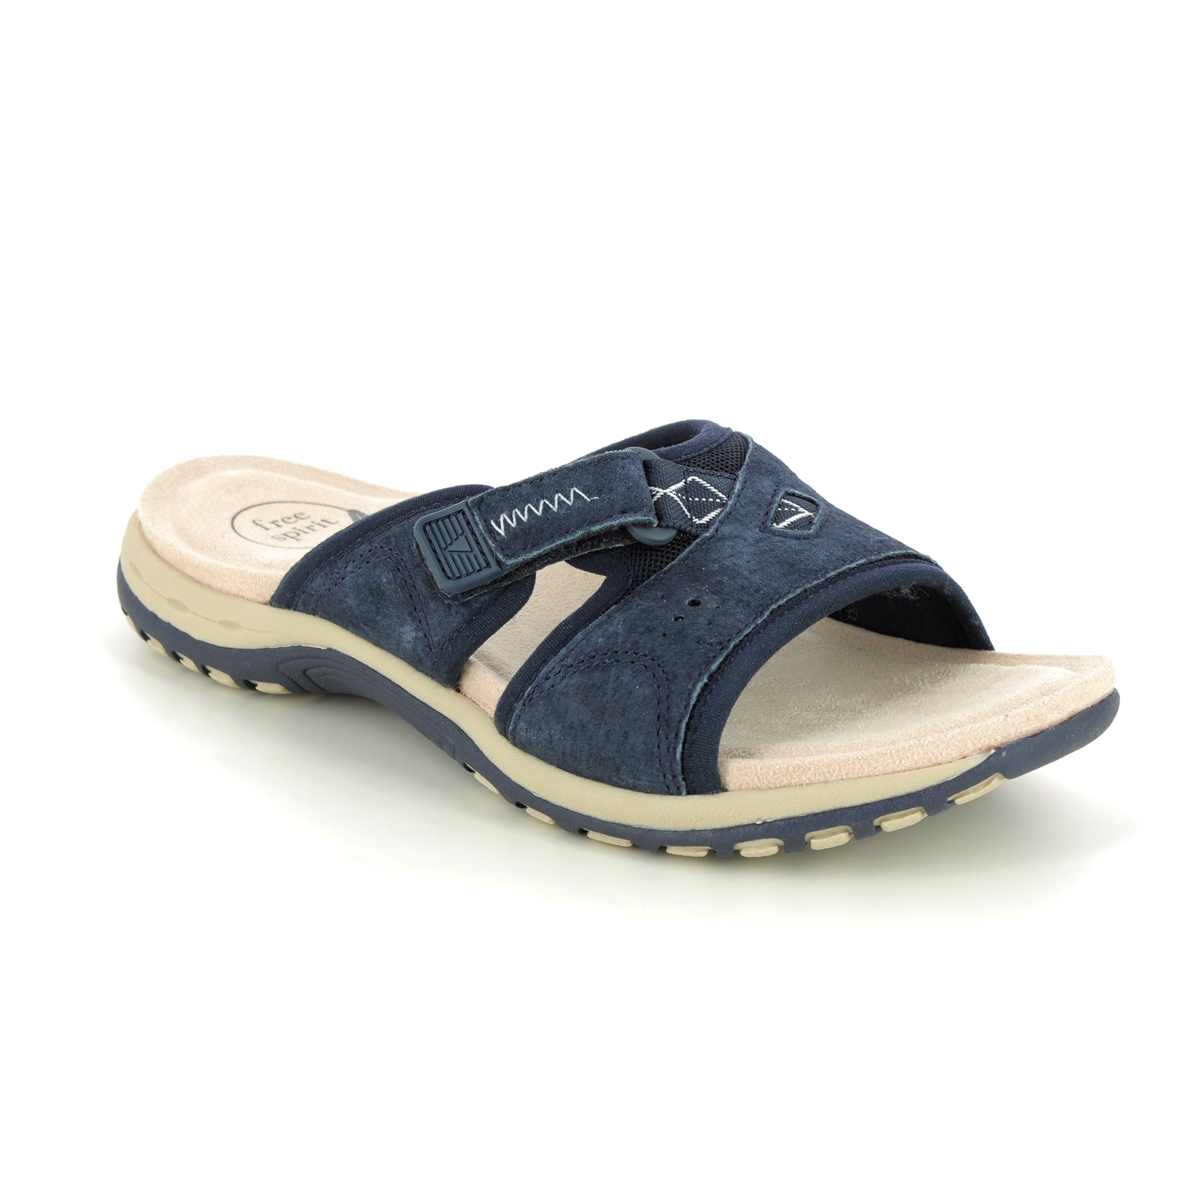 Earth Spirit Wickford Navy Suede Womens Slide Sandals 40517- In Size 6 In Plain Navy Suede